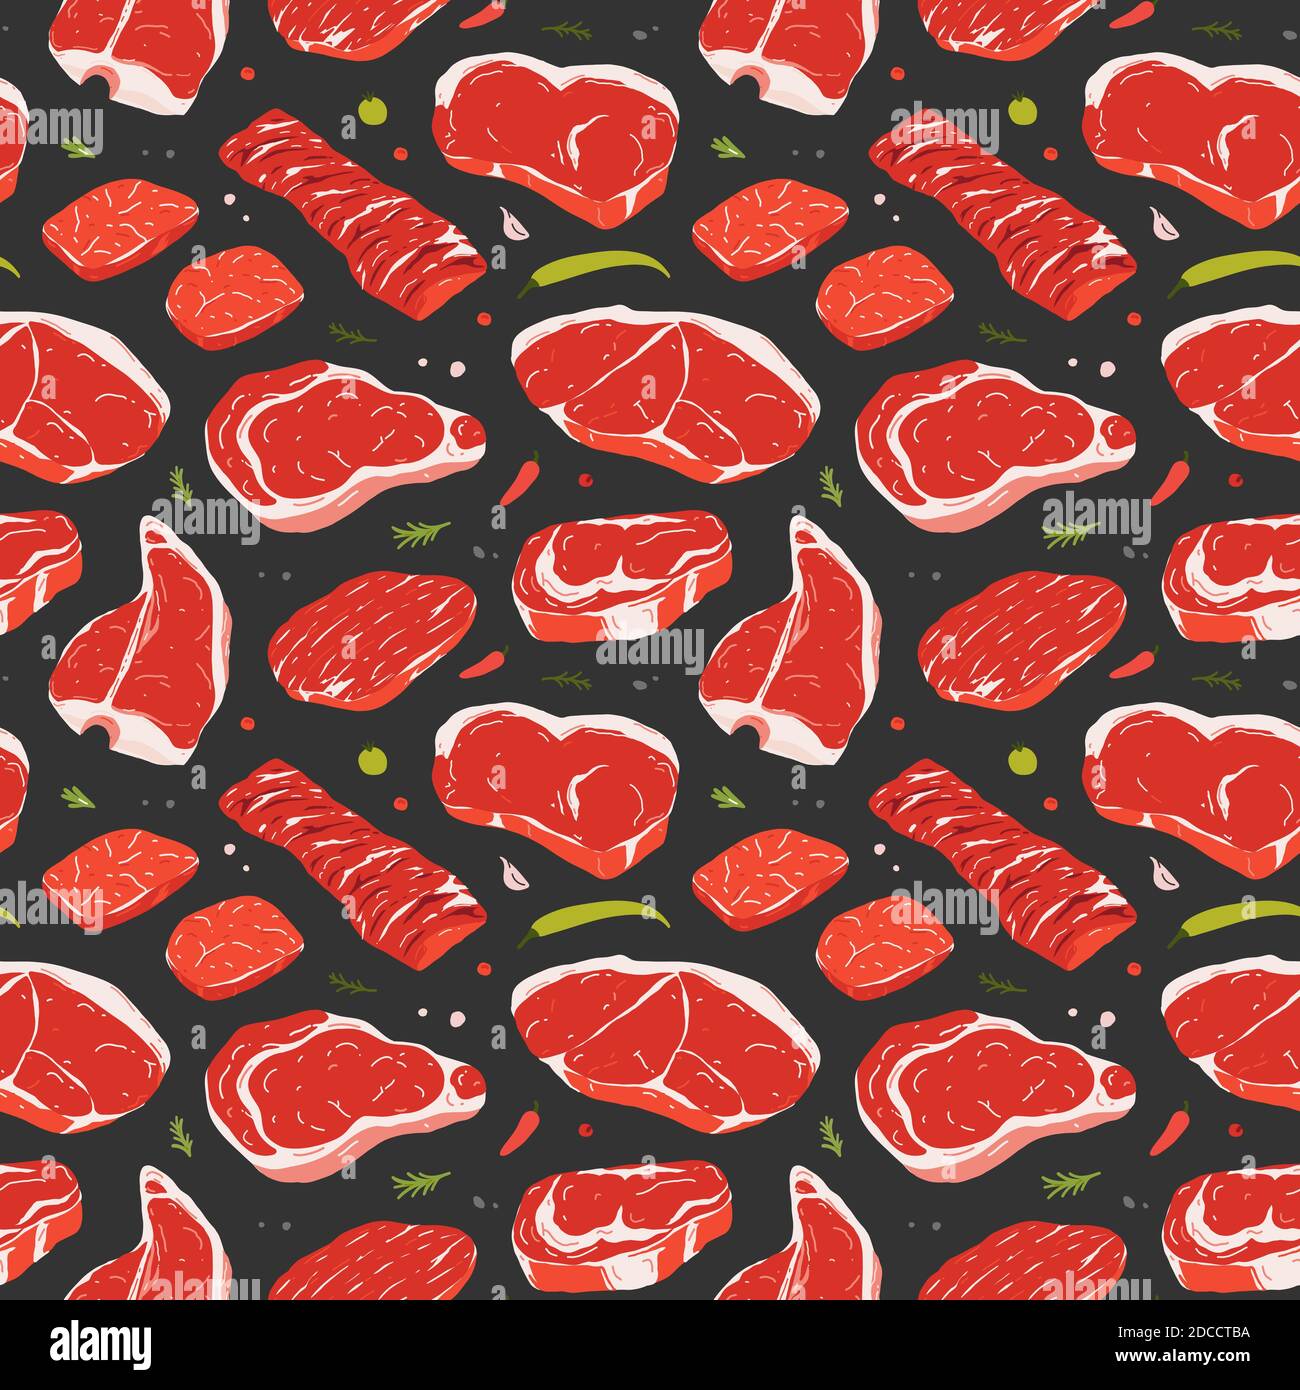 Steak pattern, various beef cuts, realistic raw meat illustration, black background for butchery shop or steakhouse.  Stock Vector